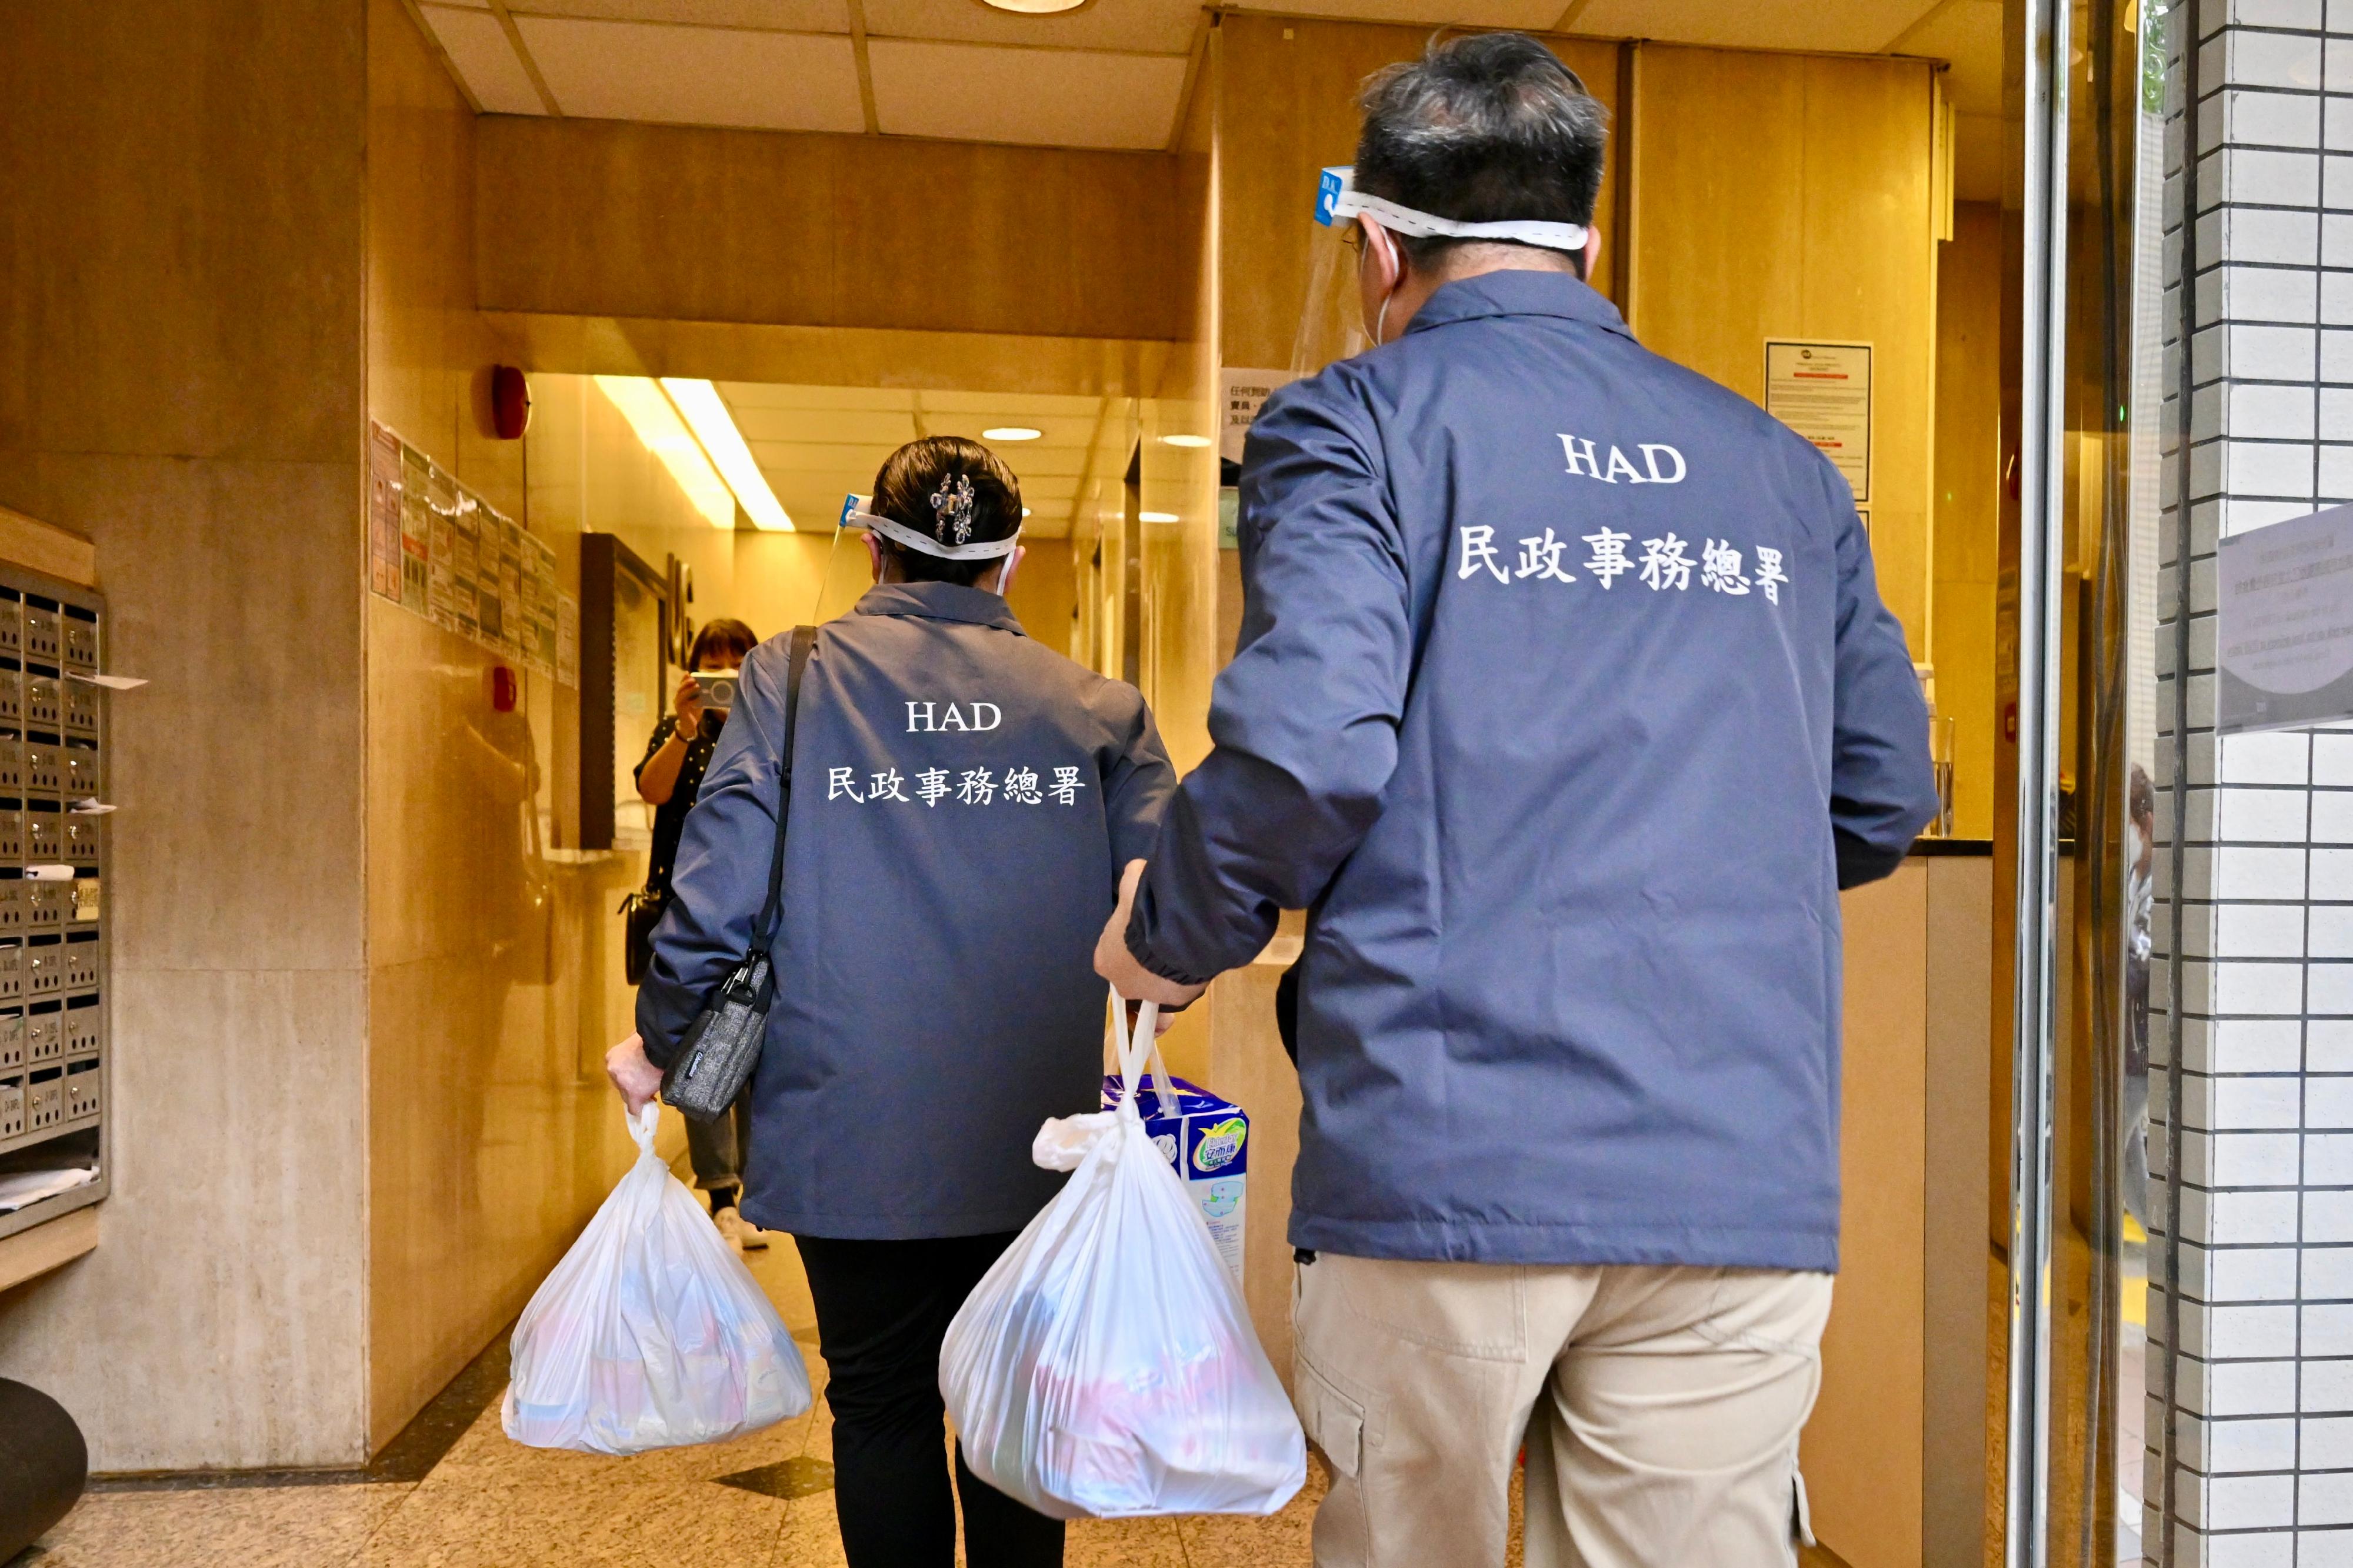 The Acting Director of Home Affairs, Miss Vega Wong, together with the "Special Caring Delivery Team" formed by civil servants, delivered food and basic daily necessities to families in need in the Hong Kong East District on March 26. Photo shows Miss Wong (left) joining the delivery service with a civil servant.